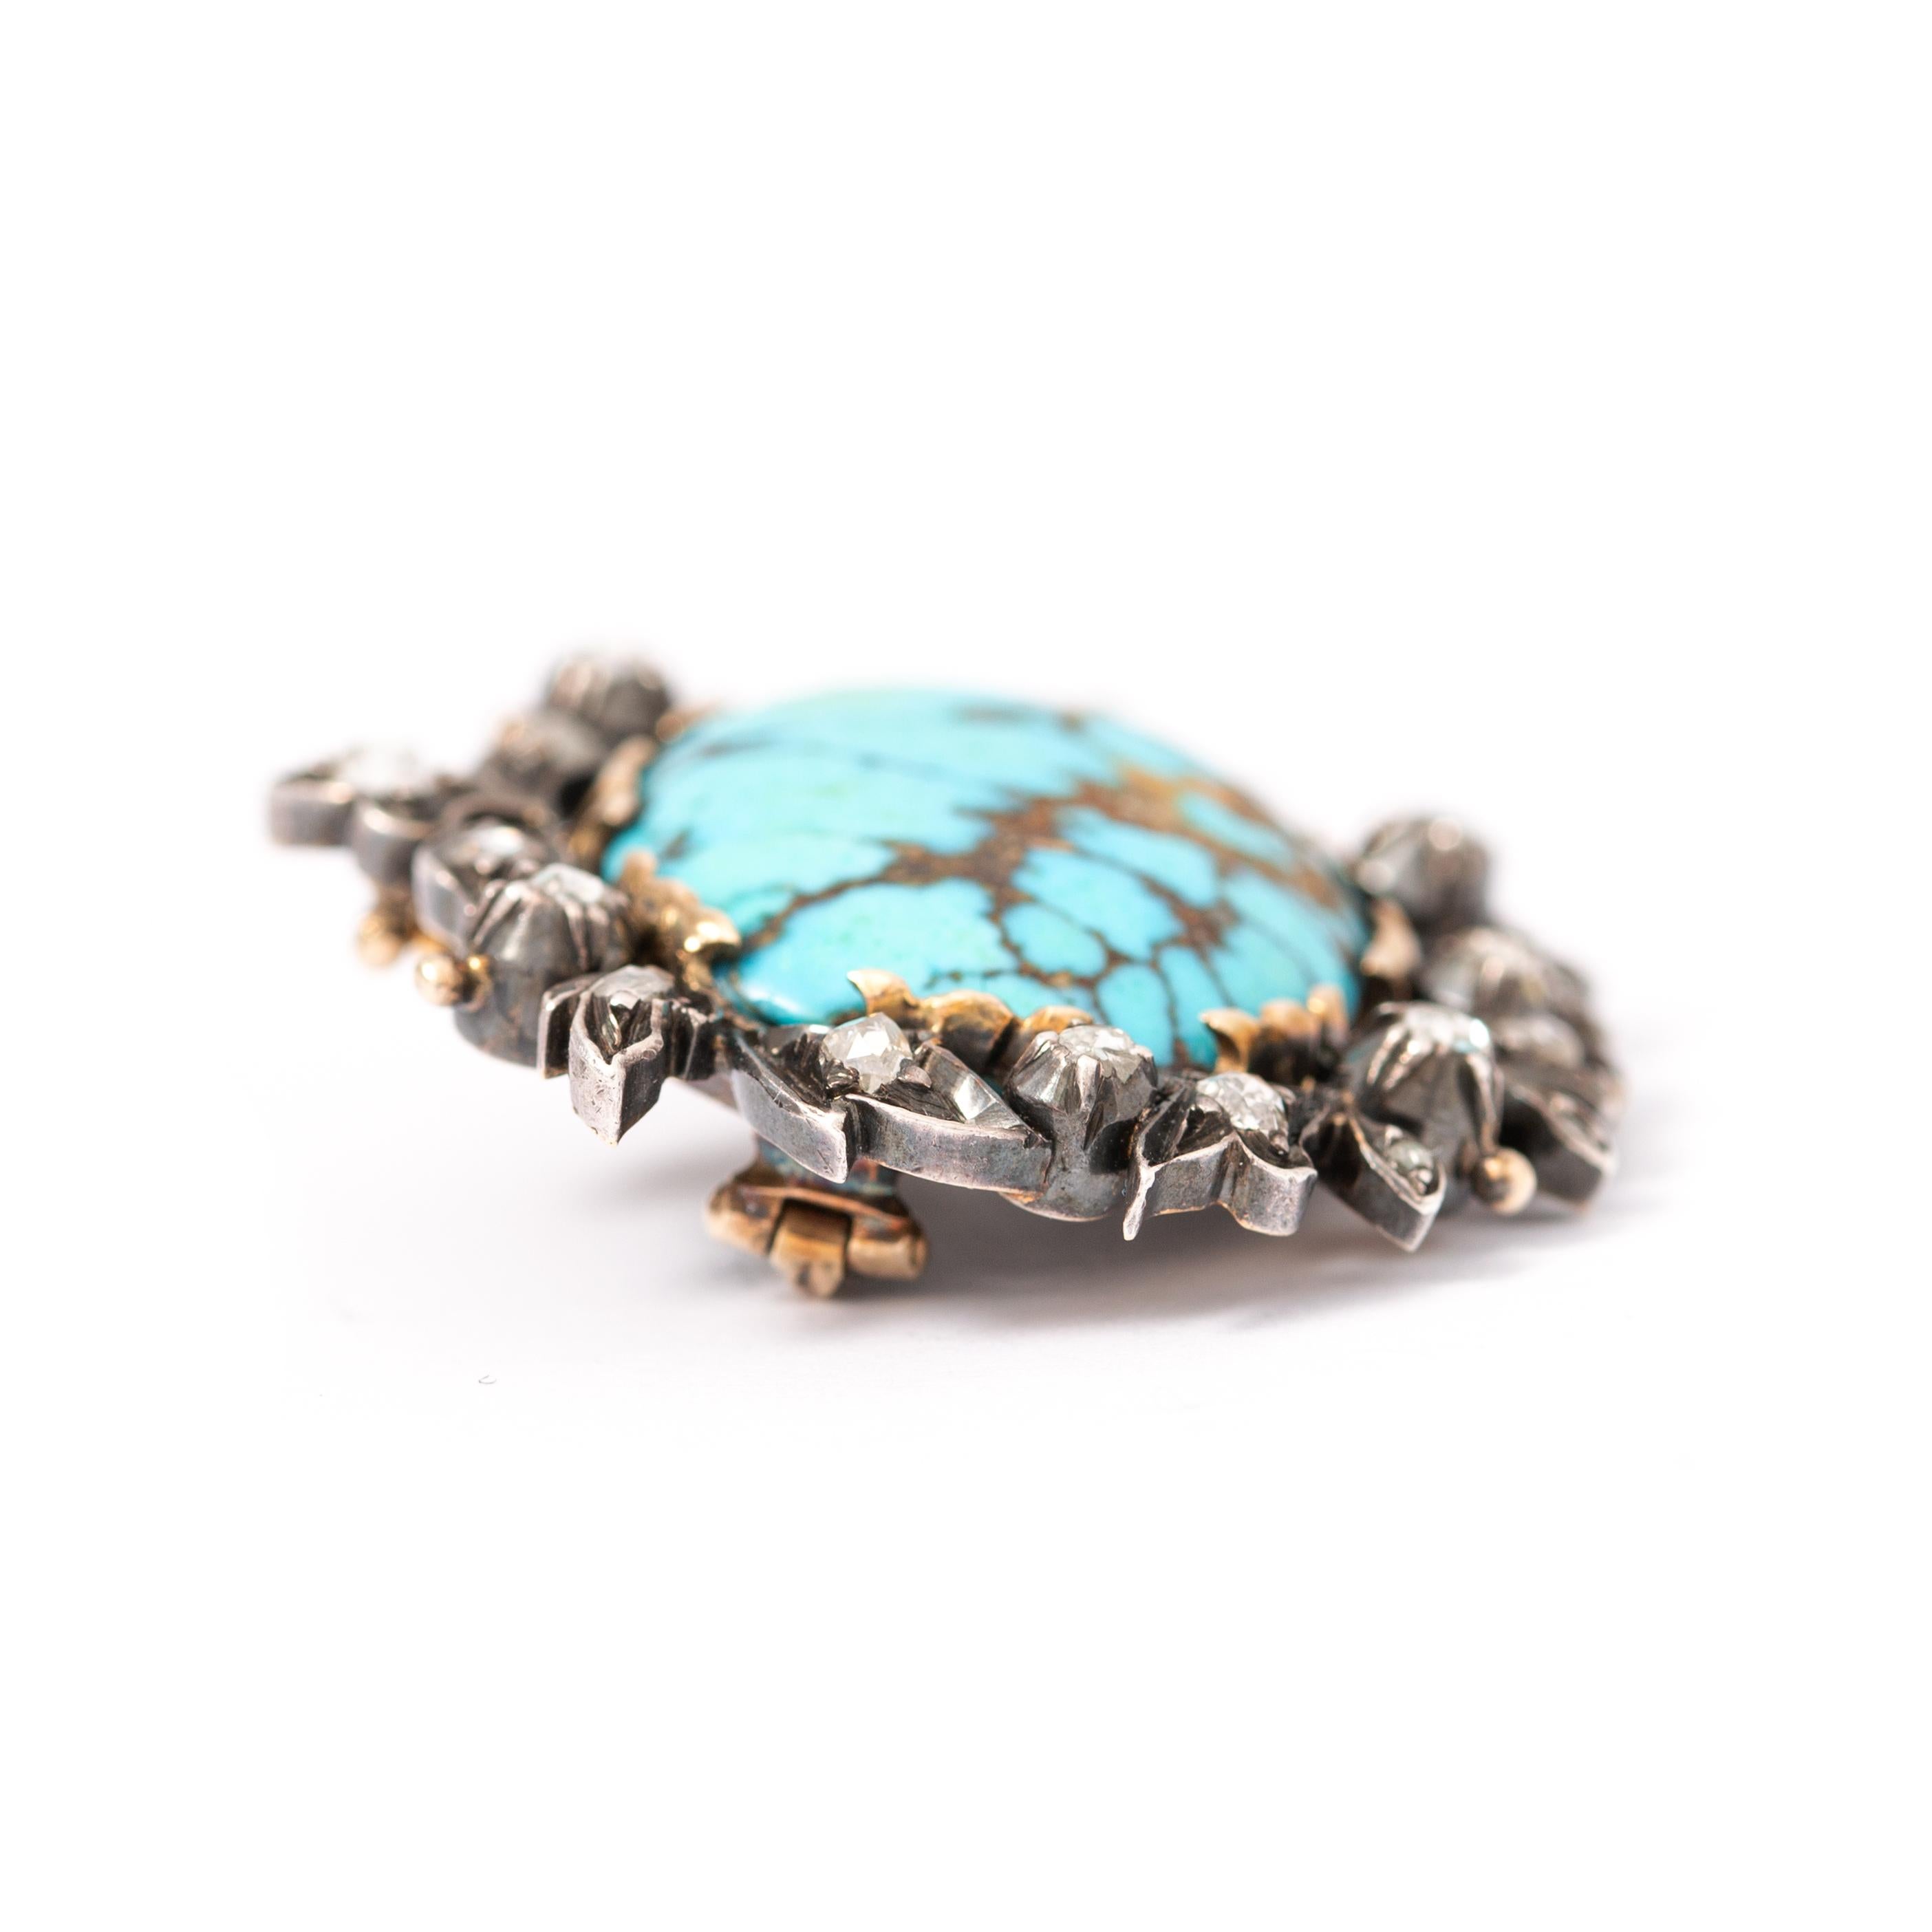 Antique 14K gold and 800 silver brooch centered by a turquoise matrix surrounded by rose cut diamonds. 
Early 20th century. 
Size of the turquoise: 2.30 x 1.70 cm. 
Gross weight: 11.40 grams.